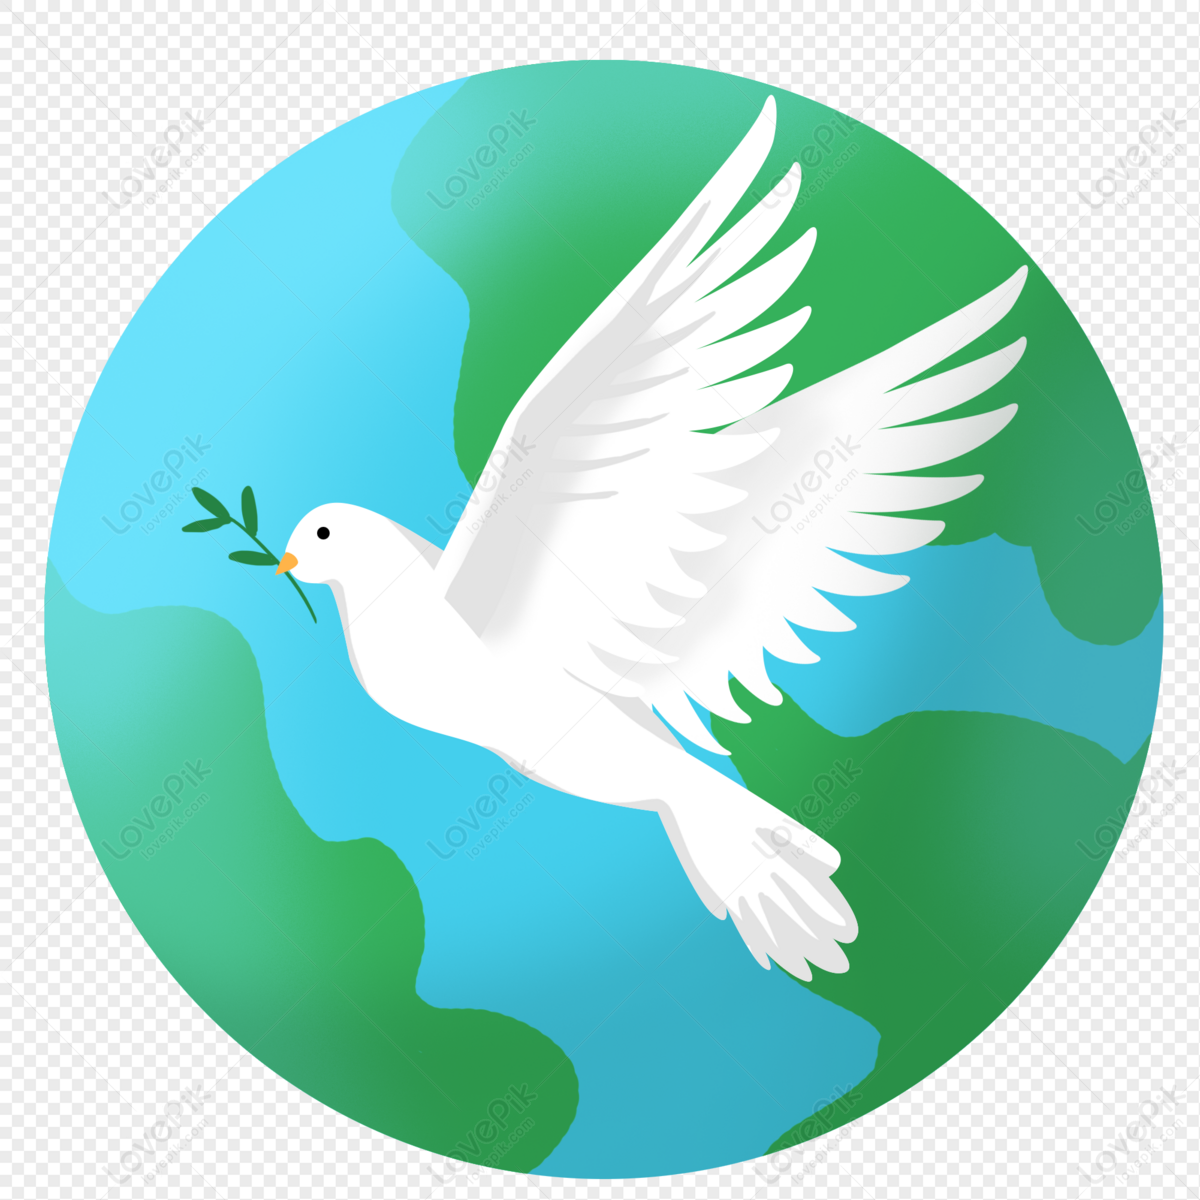 Hand Drawn Cartoon Dove Of Peace PNG Image Free Download And Clipart Image  For Free Download - Lovepik | 401258621